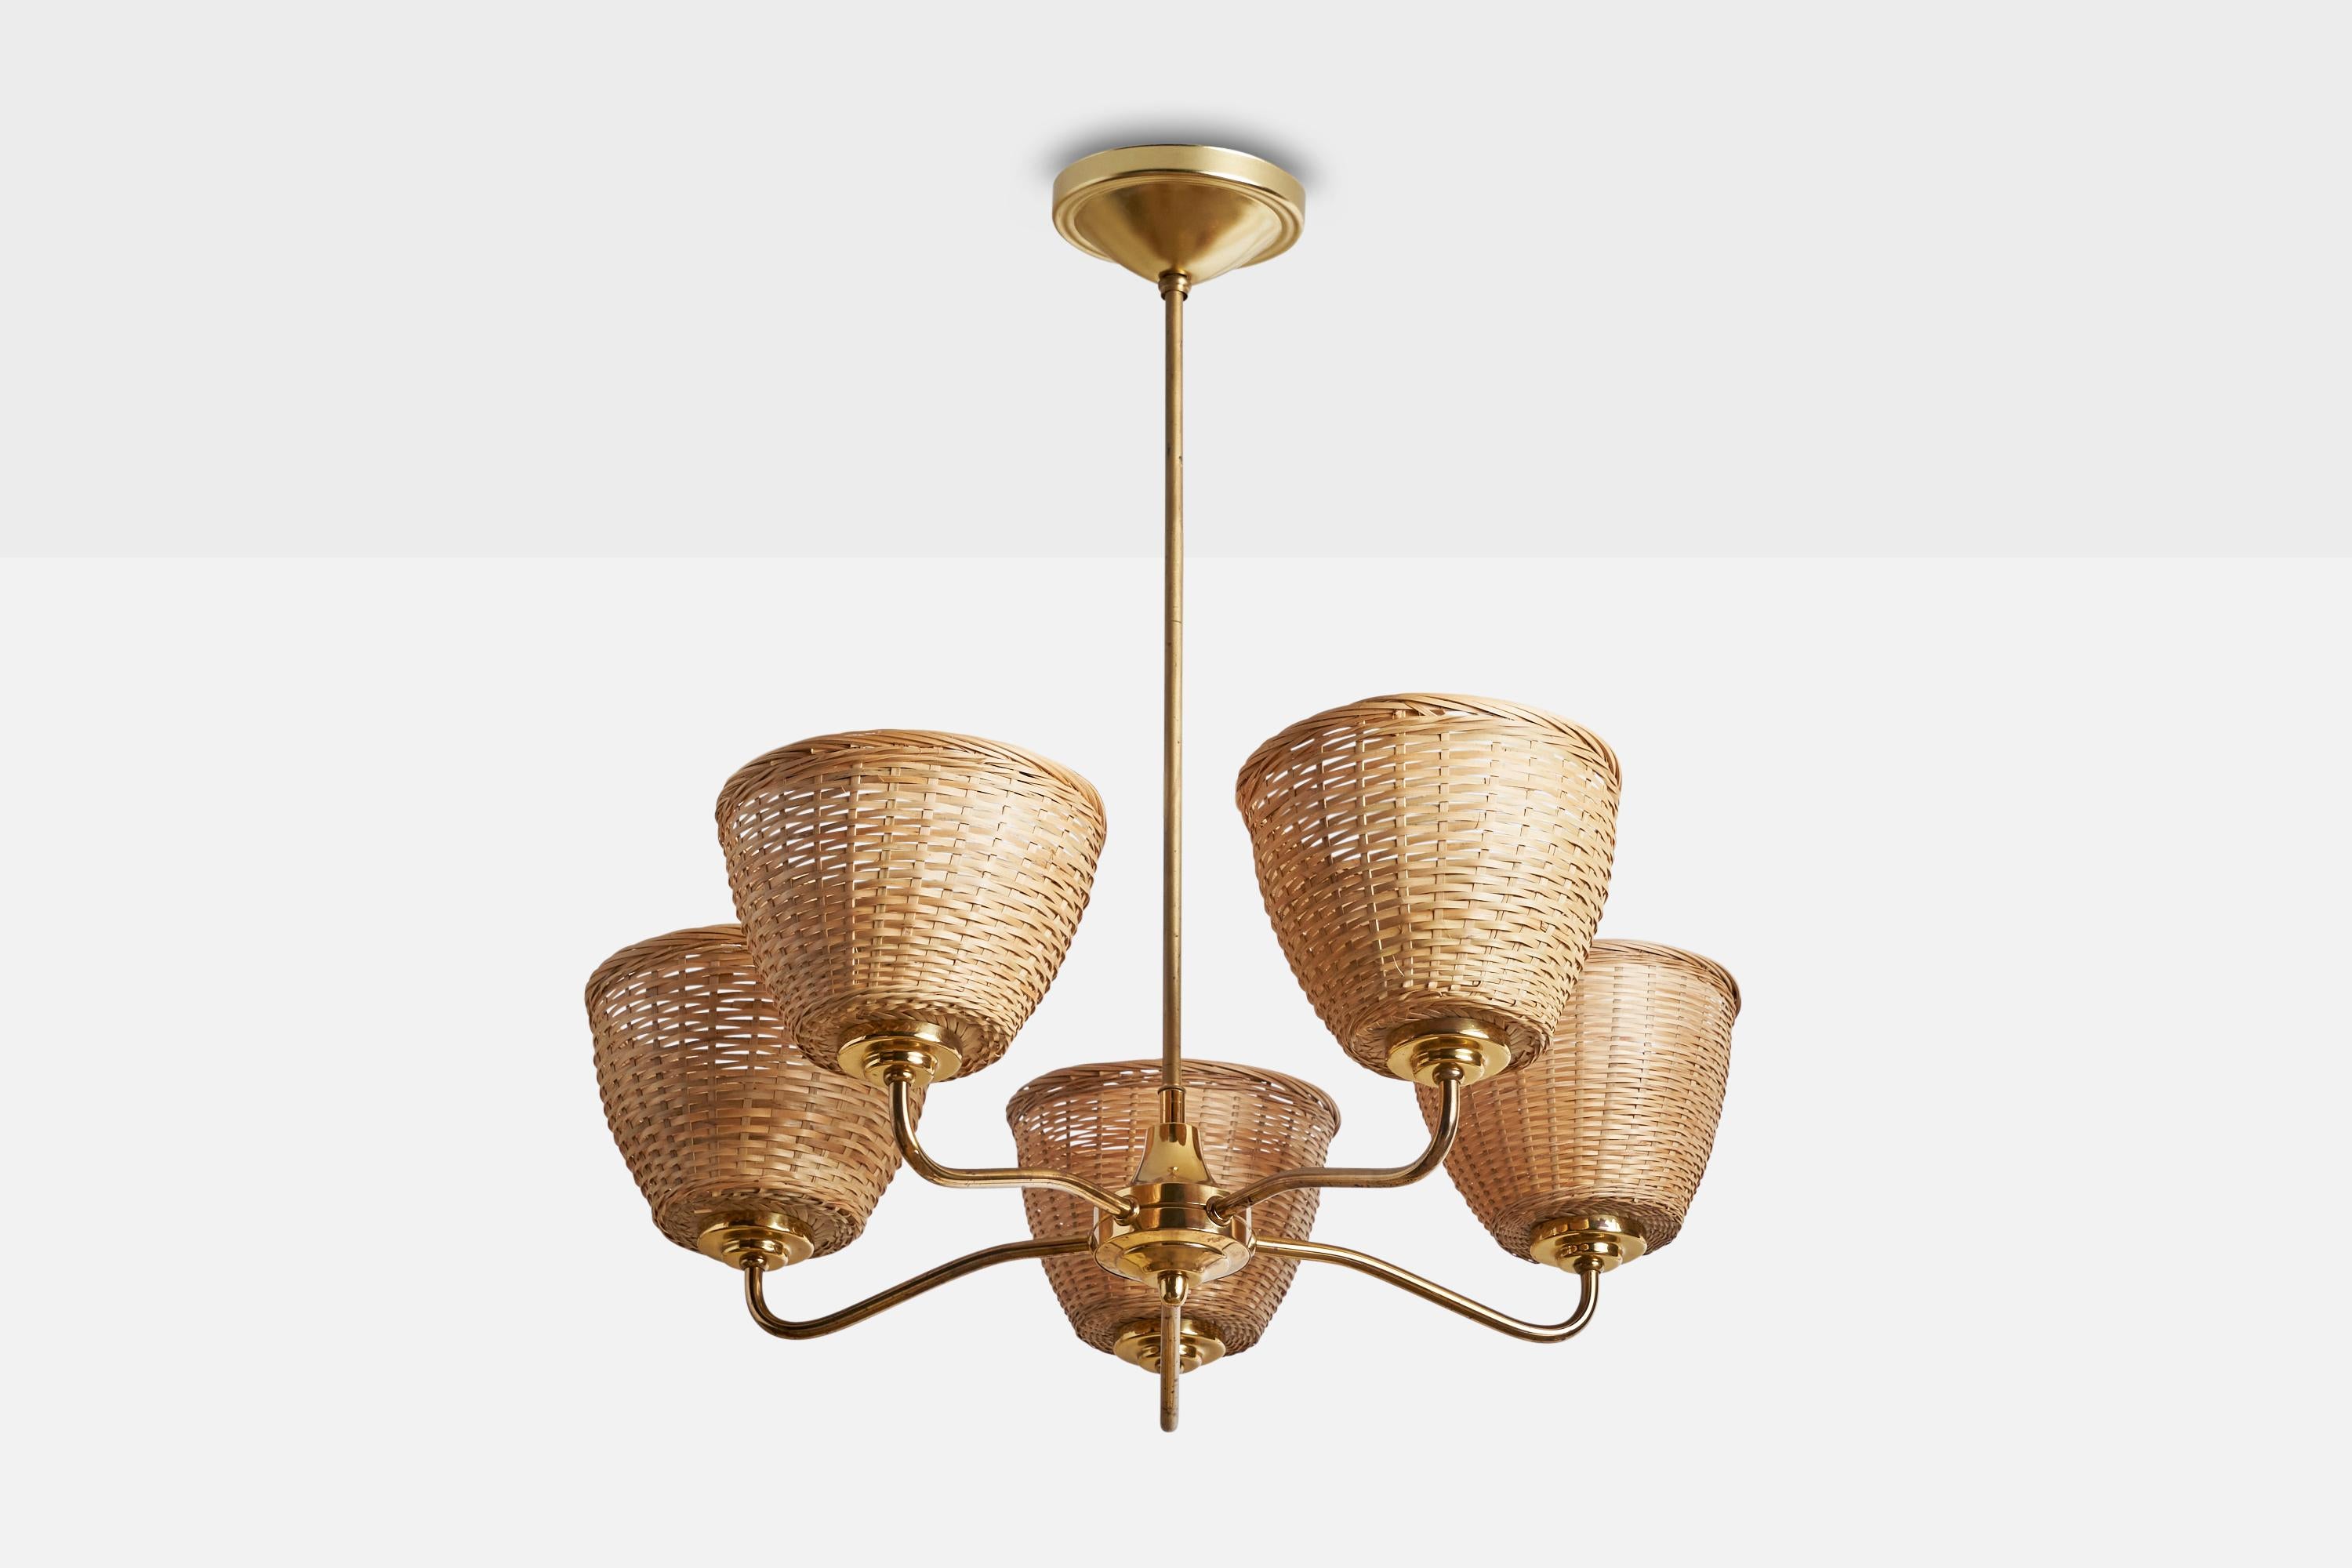 A brass and rattan chandelier designed and produced in Sweden, 1950s.

Dimensions of canopy (inches): 2”  H x 5”  Diameter
Socket takes standard E-14 bulbs. 5 sockets.There is no maximum wattage stated on the fixture. All lighting will be converted